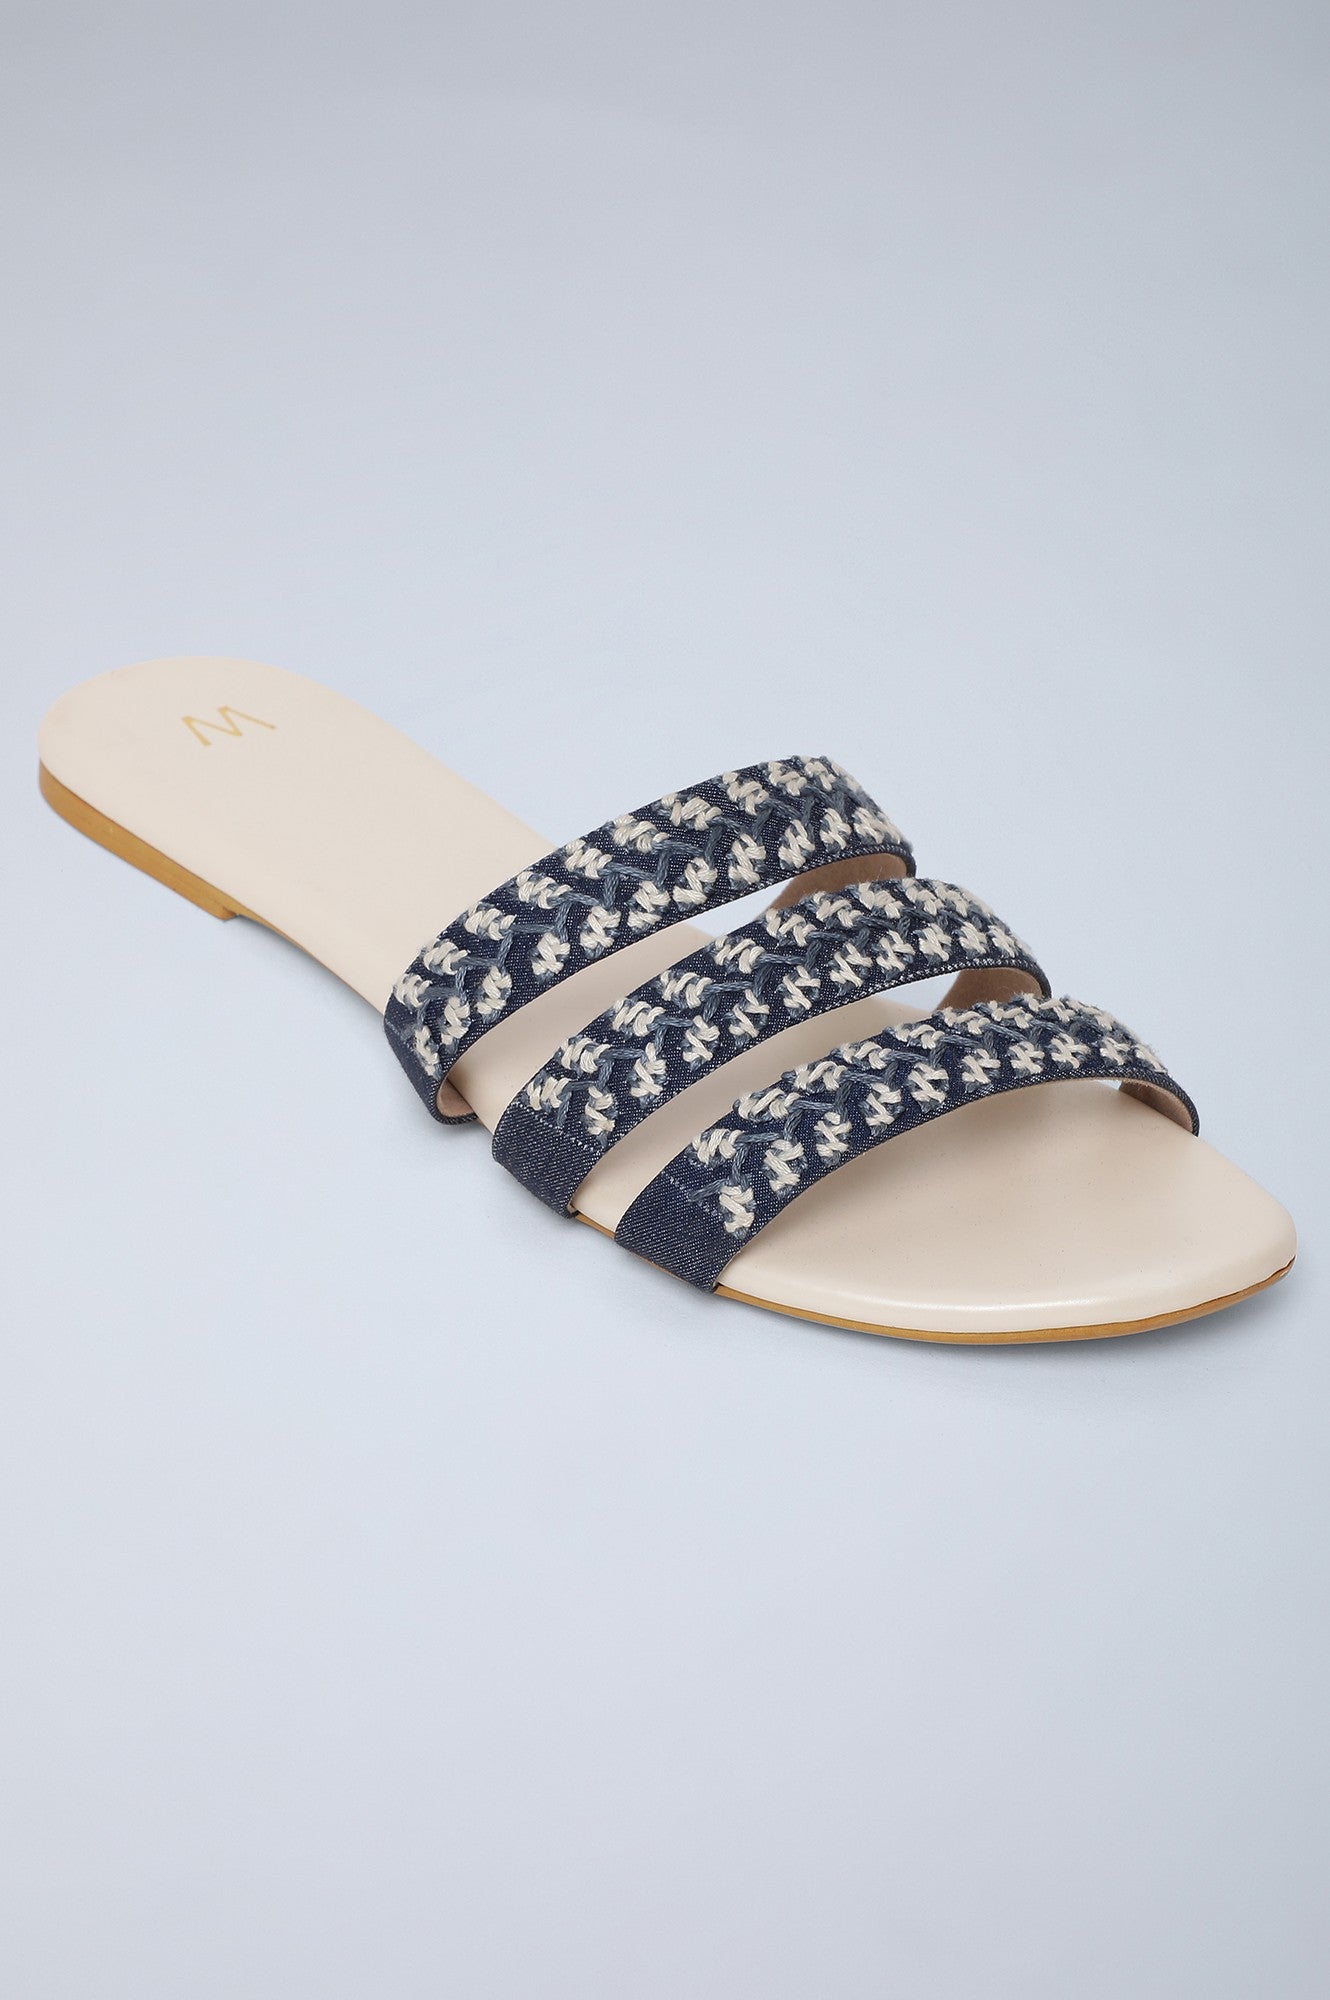 Chambray Blue Embroidered Flats